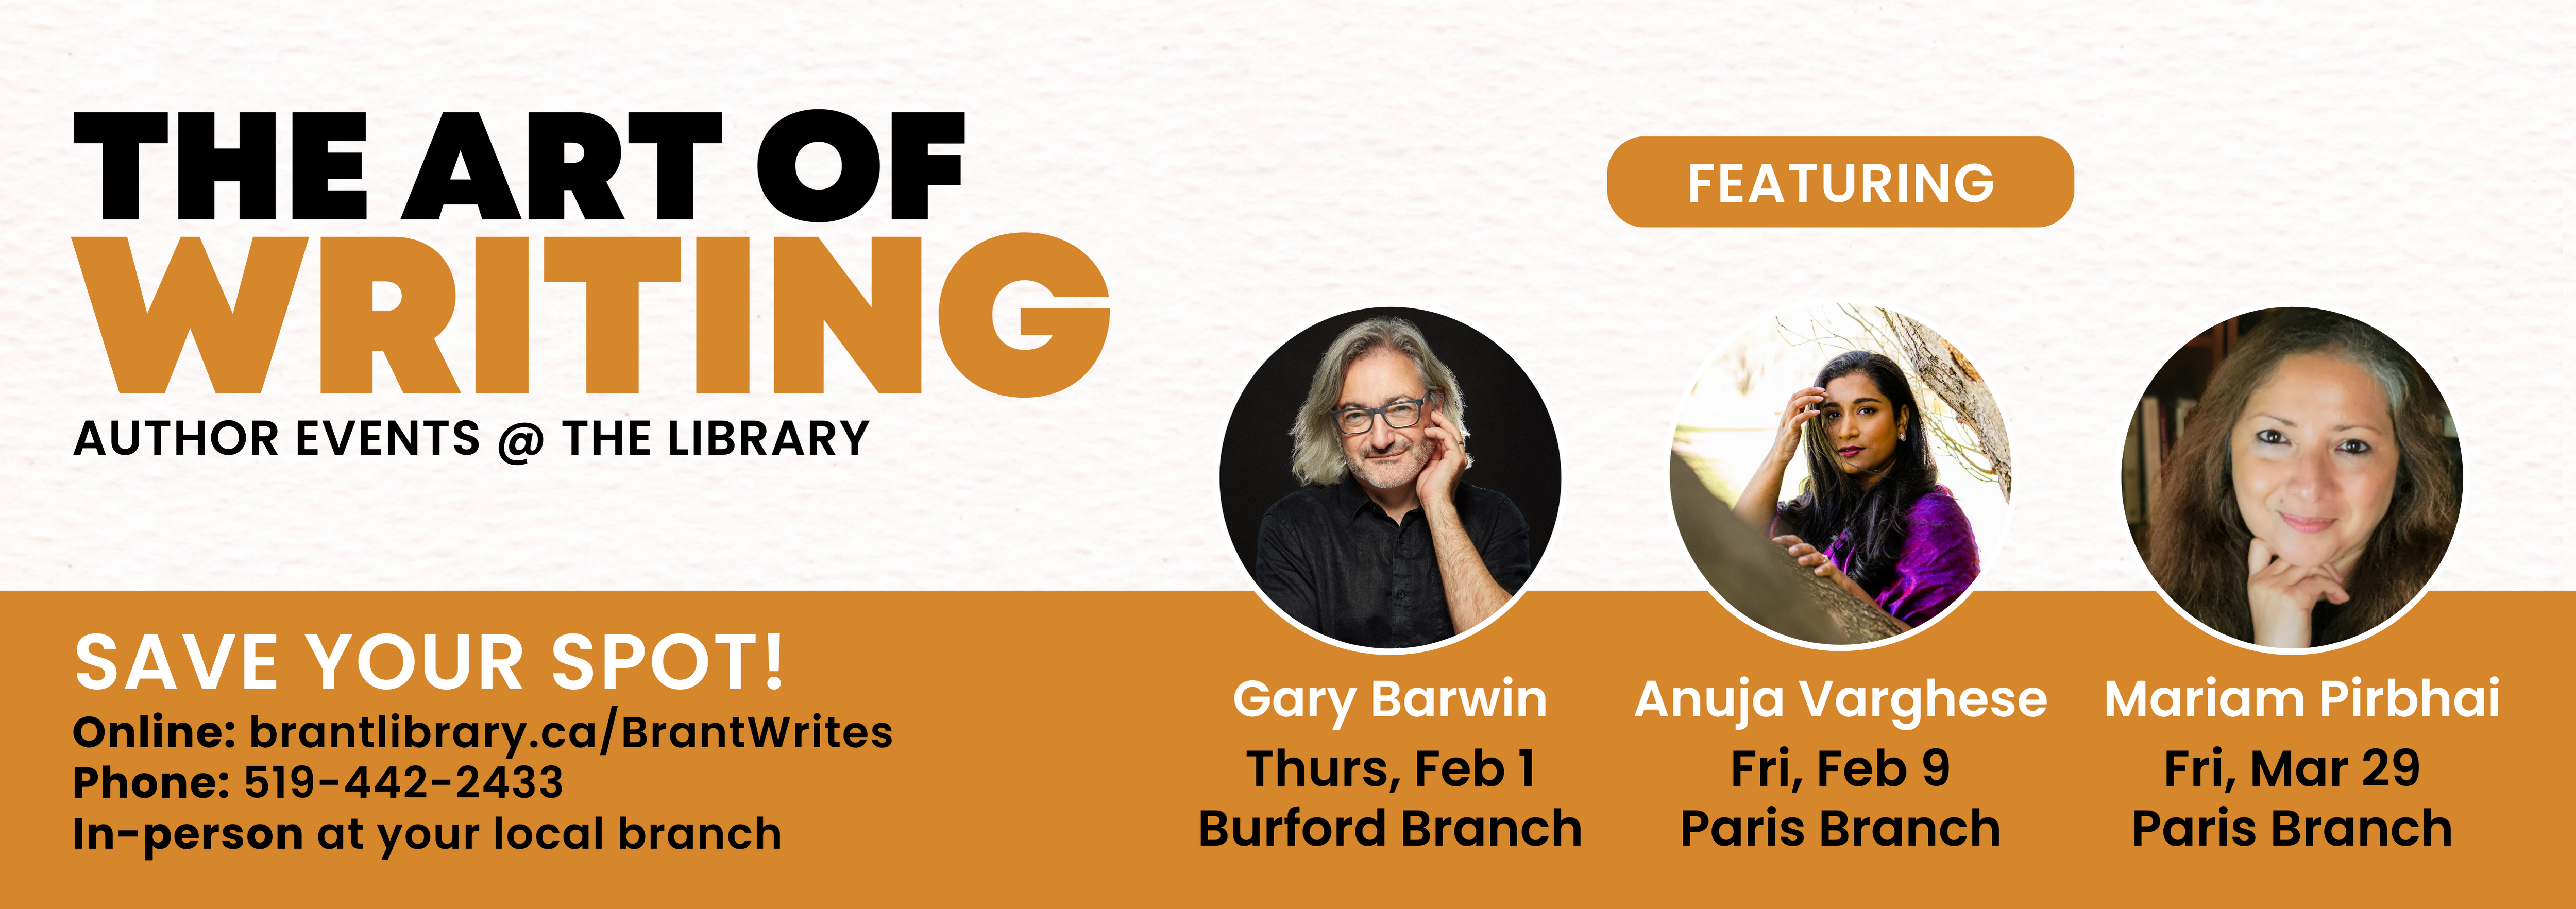 Text reads, "The art of writing. Author events at the library. save your spot! Online at brantlibrary.ca/BrantWrites. Phone 519-442-2433. In person at your local branch. Featuring Gary Barwin, February 1, Burford Branch. Anuja Varghese, February 9, Paris Branch. Mariam Pirbhai, March 28, Paris Branch." Professional portraits of each author located above names.